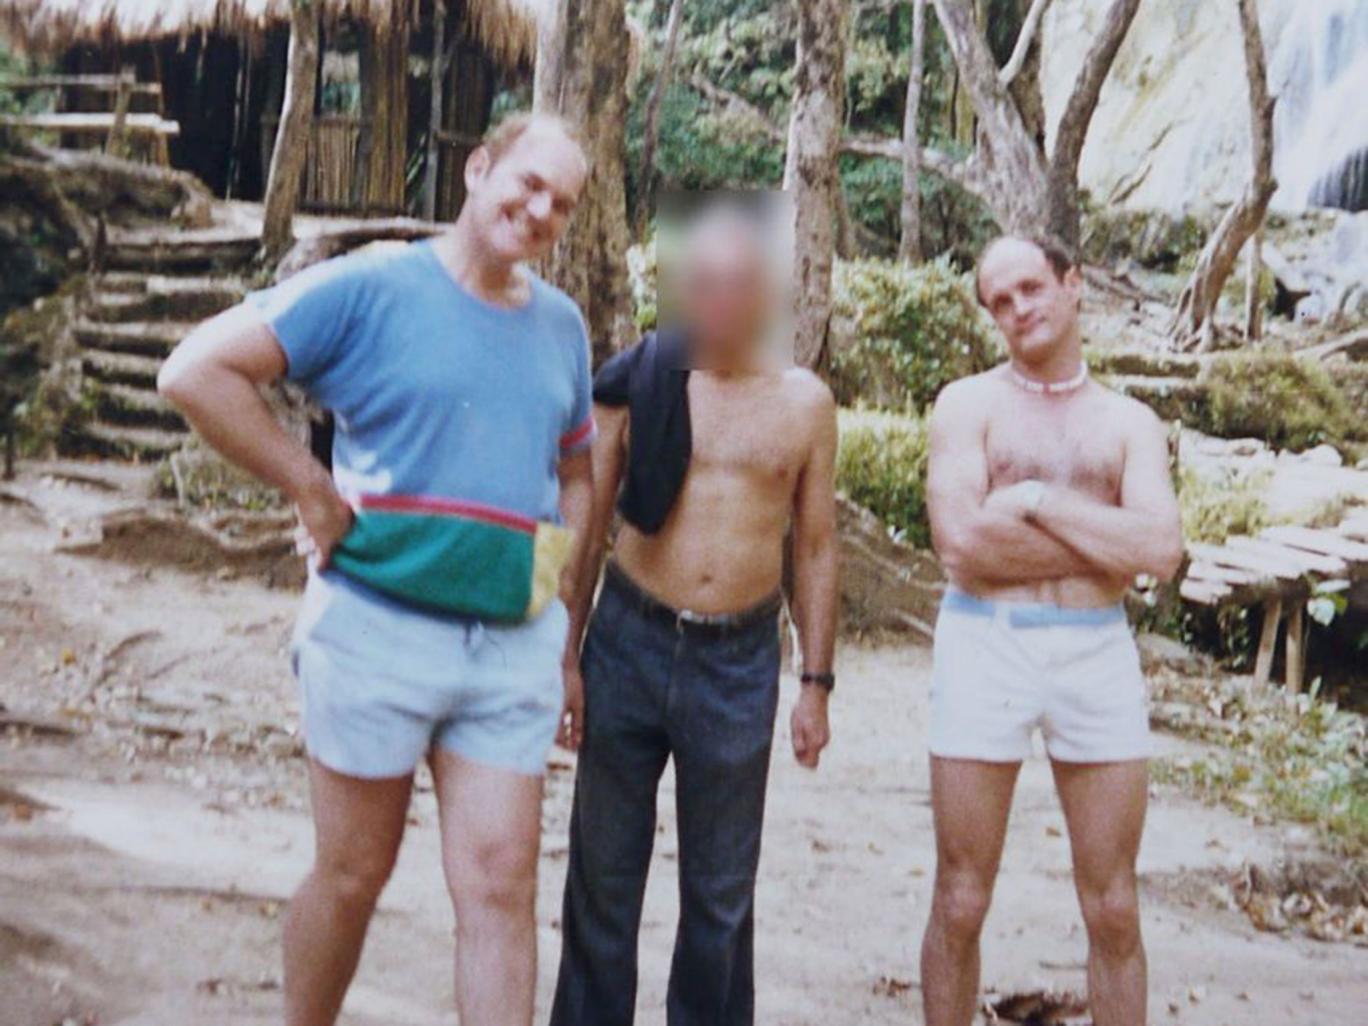 Douglas Slade (left) and Christopher Skeaping were members of the Paedophile Information Exchange